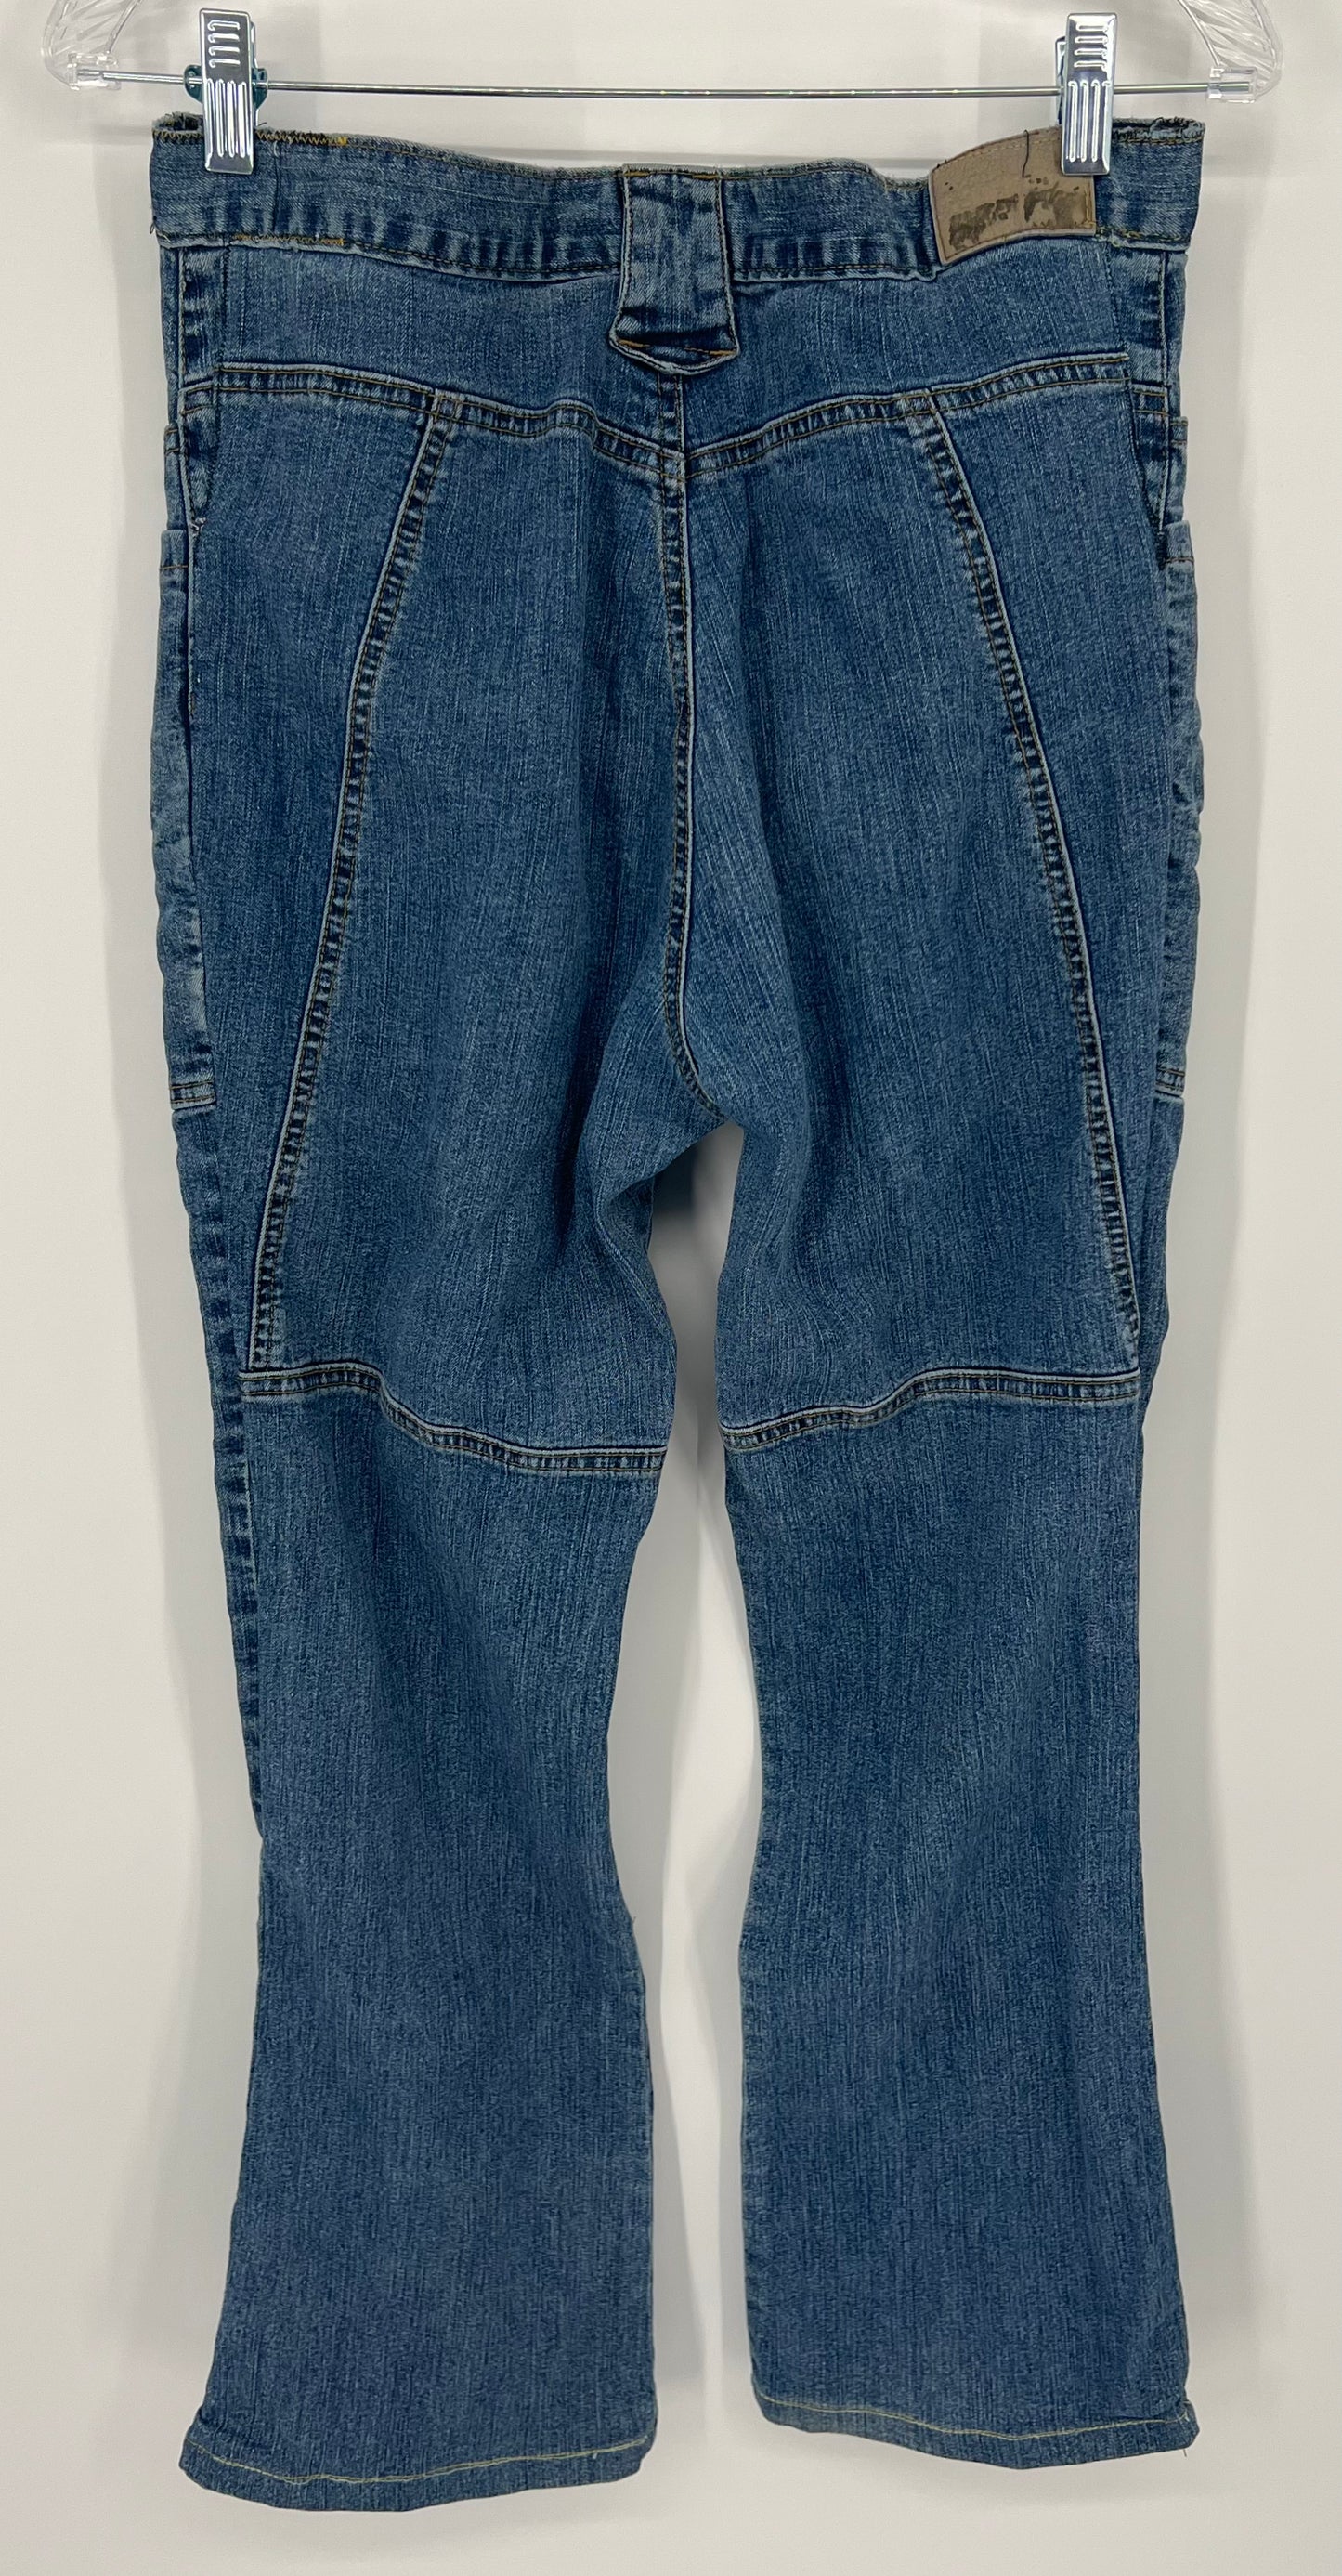 Vintage 90s / Y2K Adolfo Mid-Rise Jeans with Zippered Cargo Pockets | Sz: 14